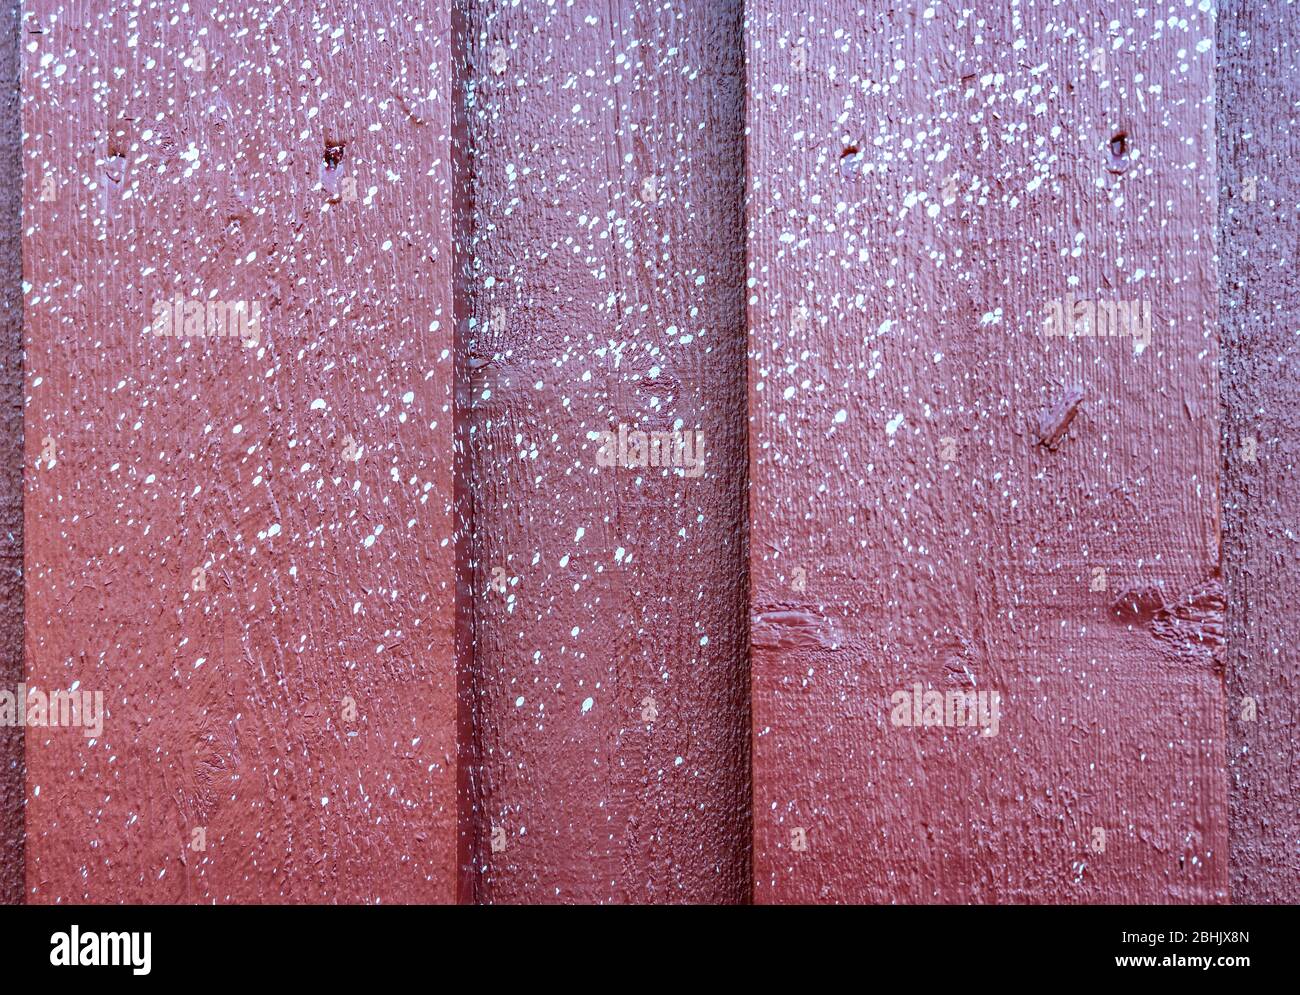 Close up view at multiple small white spots of white paint accidentally sprayed at red wooden wall. Stock Photo